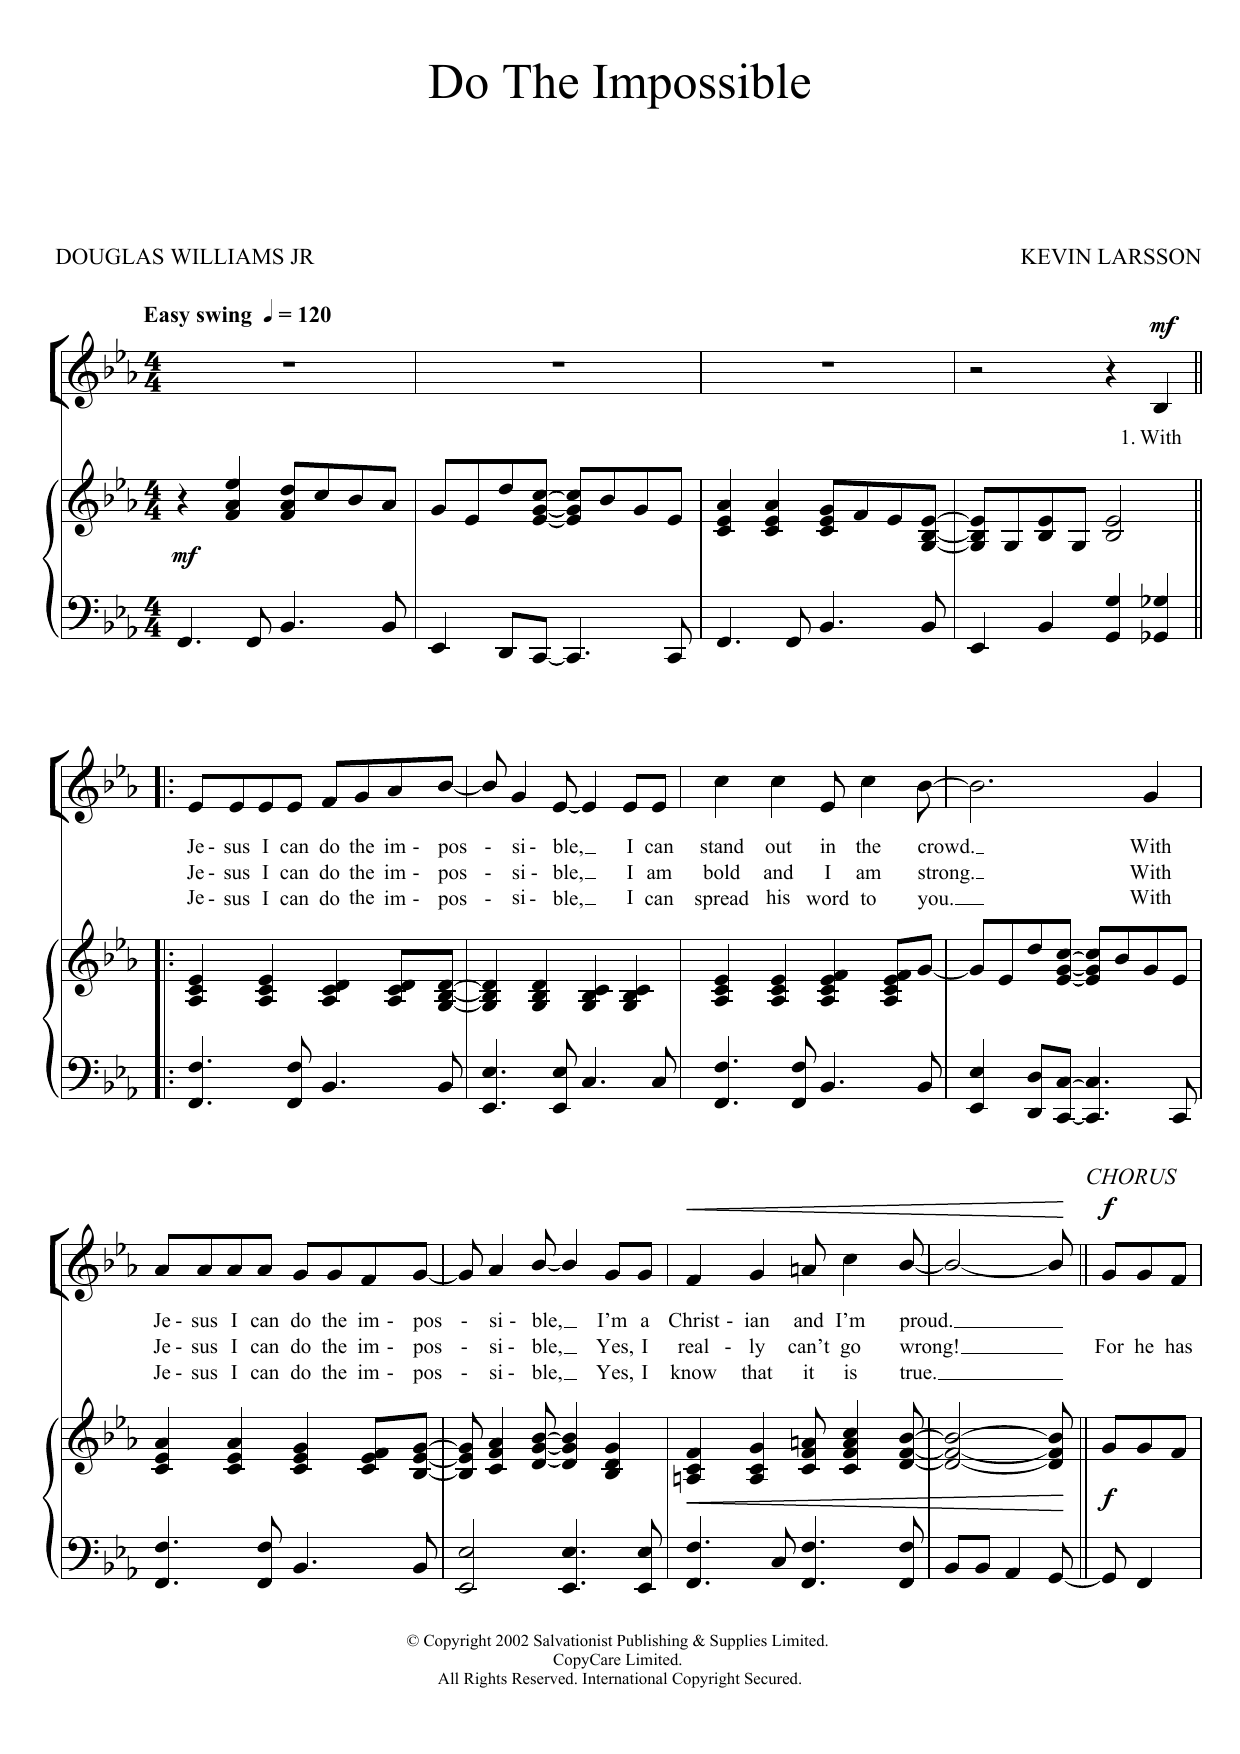 Download The Salvation Army Do The Impossible Sheet Music